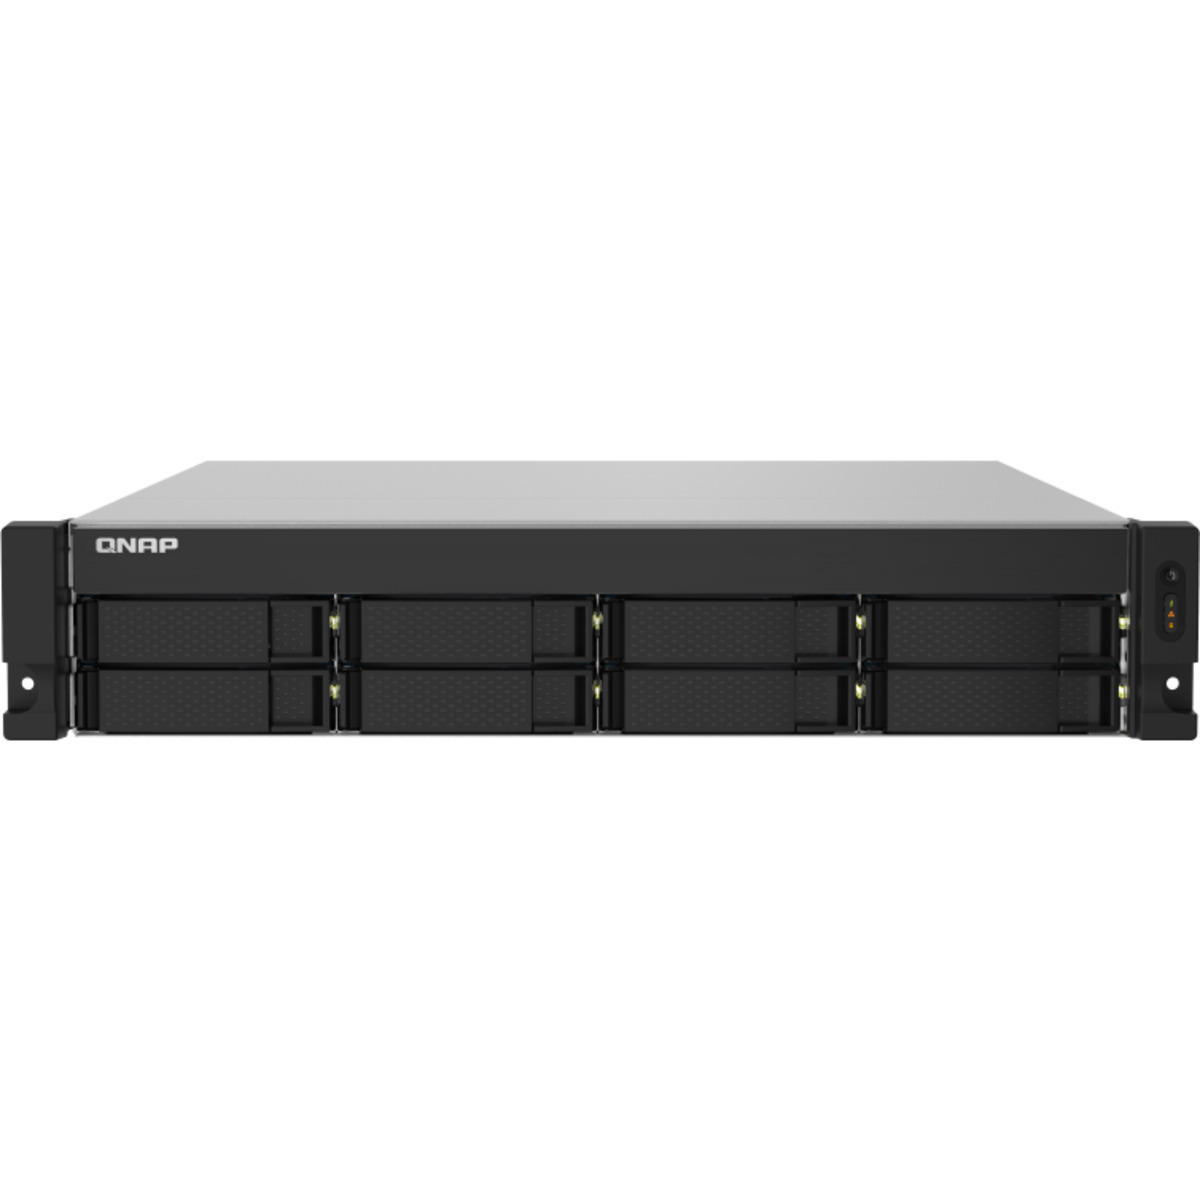 buy QNAP TS-832PXU-RP 32tb RackMount NAS - Network Attached Storage Device 8x4000gb Toshiba MN Series MN08ADA400E 3.5 7200rpm SATA 6Gb/s HDD NAS Class Drives Installed - Burn-In Tested - ON SALE - FREE RAM UPGRADE - nas headquarters buy network attached storage server device das new raid-5 free shipping simply usa christmas holiday black friday cyber monday week sale happening now! TS-832PXU-RP